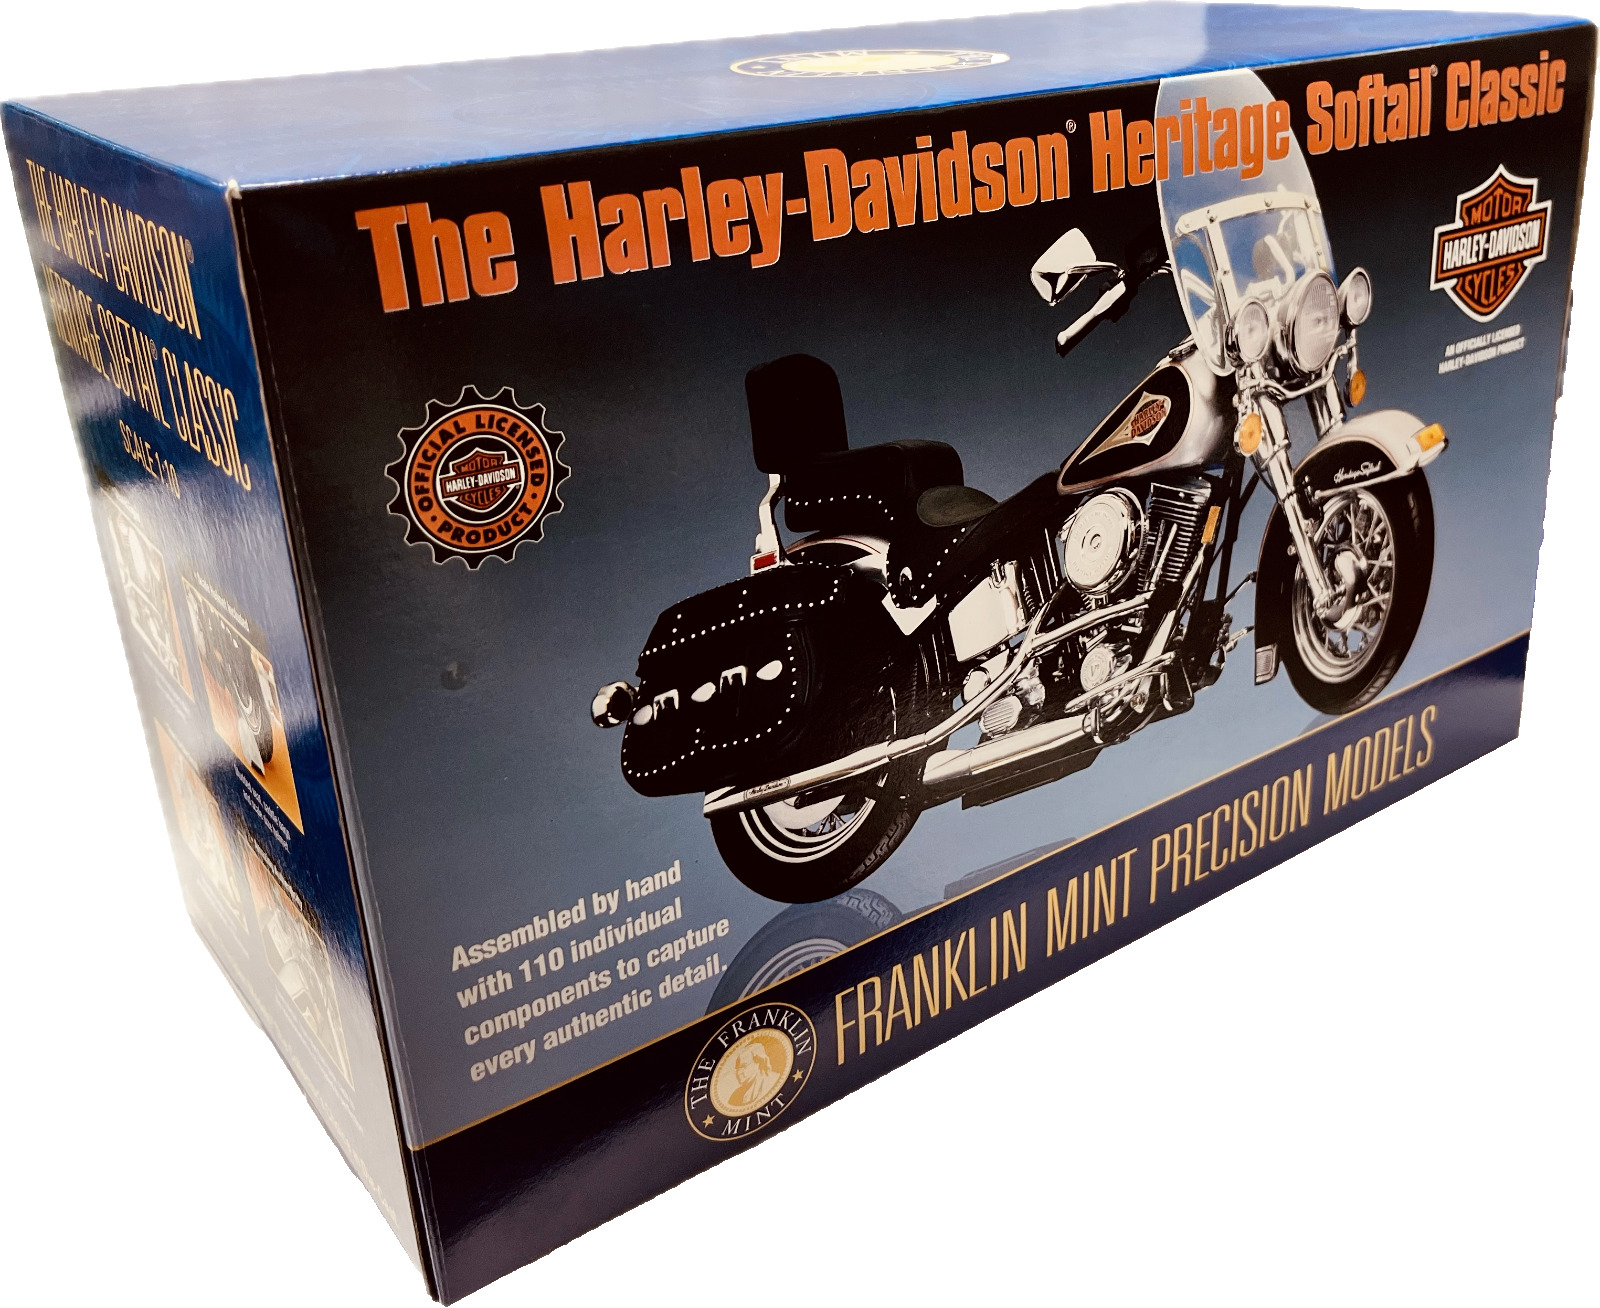 NEW FRANKLIN MINT HARLEY DAVIDSON HERITAGE SOFTAIL CLASSIC 1:10 SCALE DIECAST